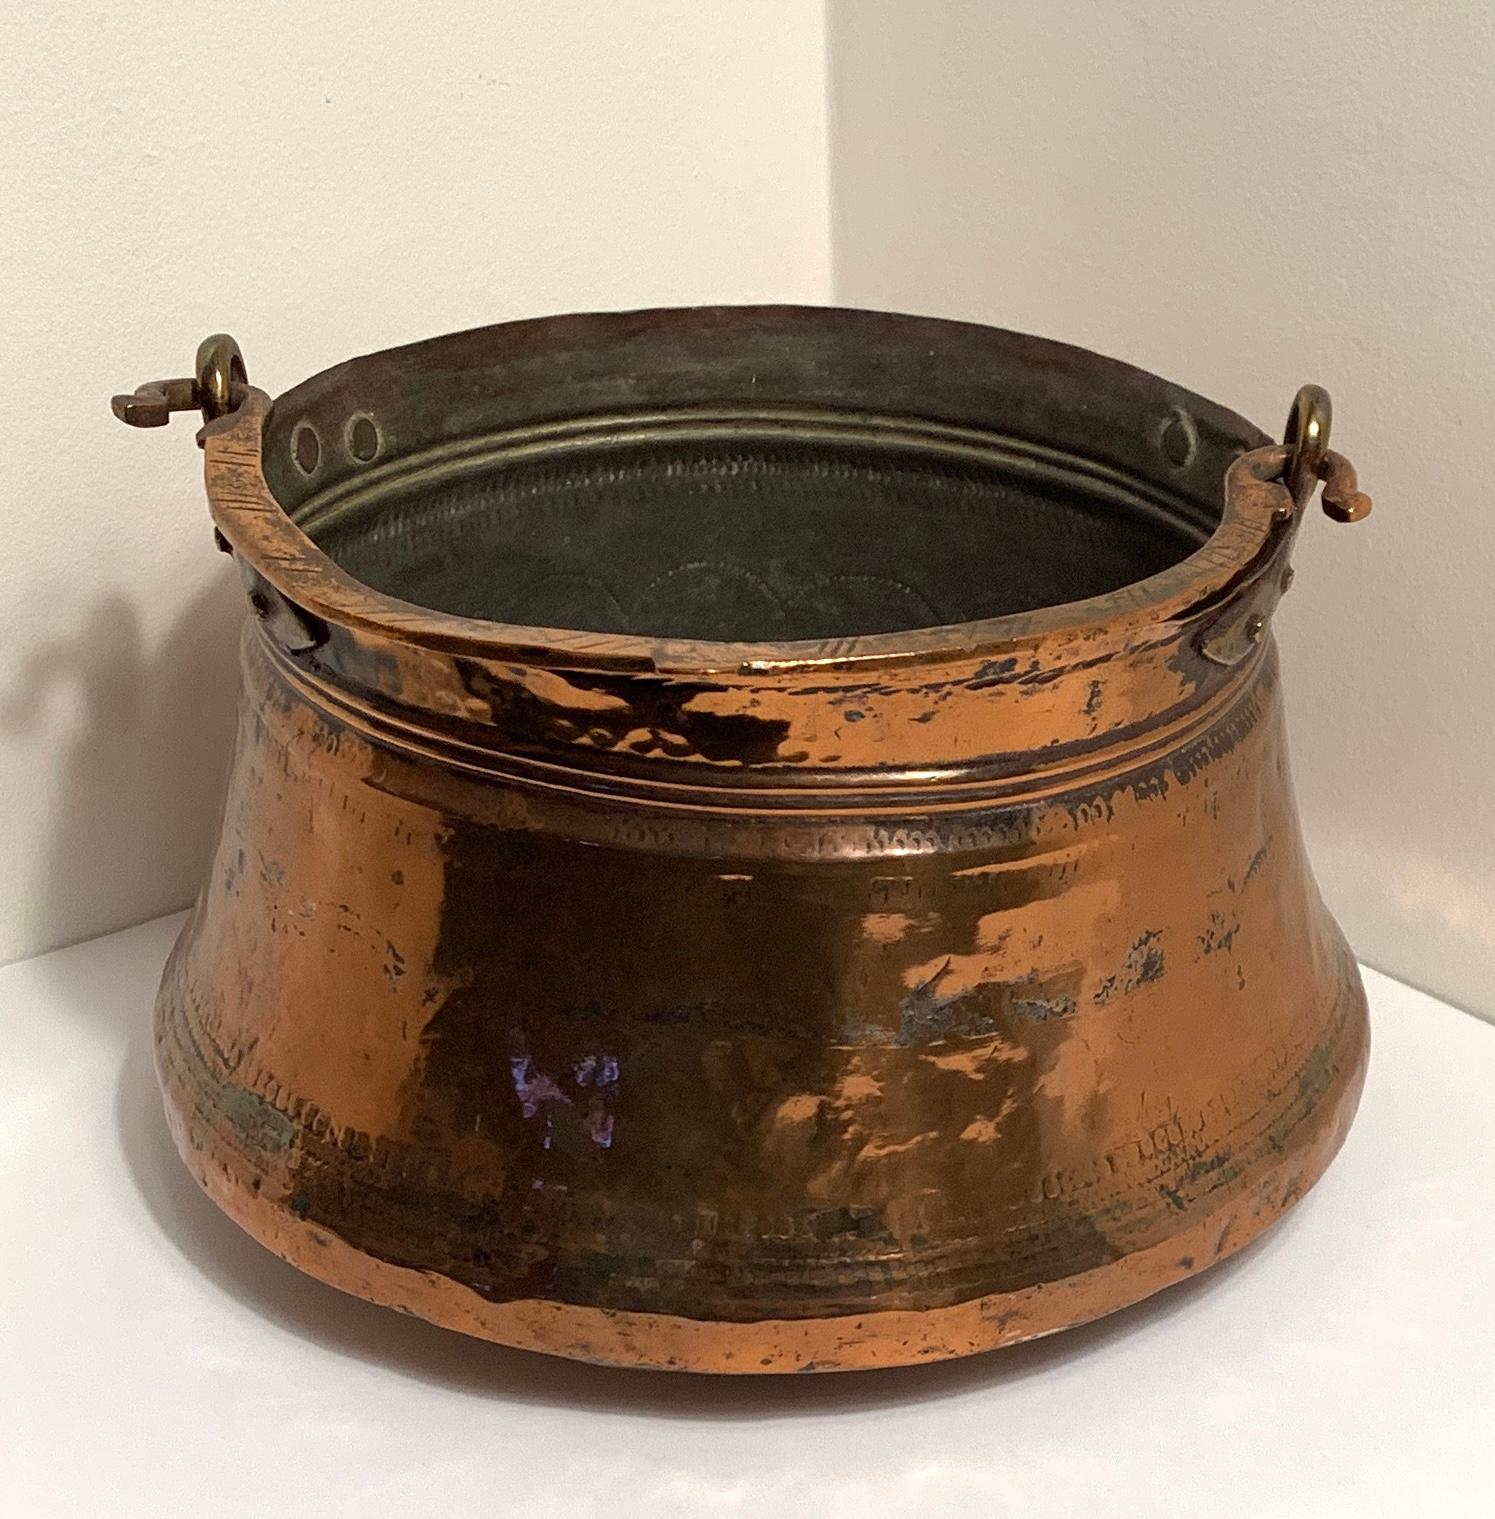 Hand-hammered Antique Rustic Copper Cauldron w/Handle 

Perfect for fireplace kindling, wine cooler at your next garden party, planter, towels, halloween candy, etc. Or actually use it for what it was made for, to cook on your fireplace hearth